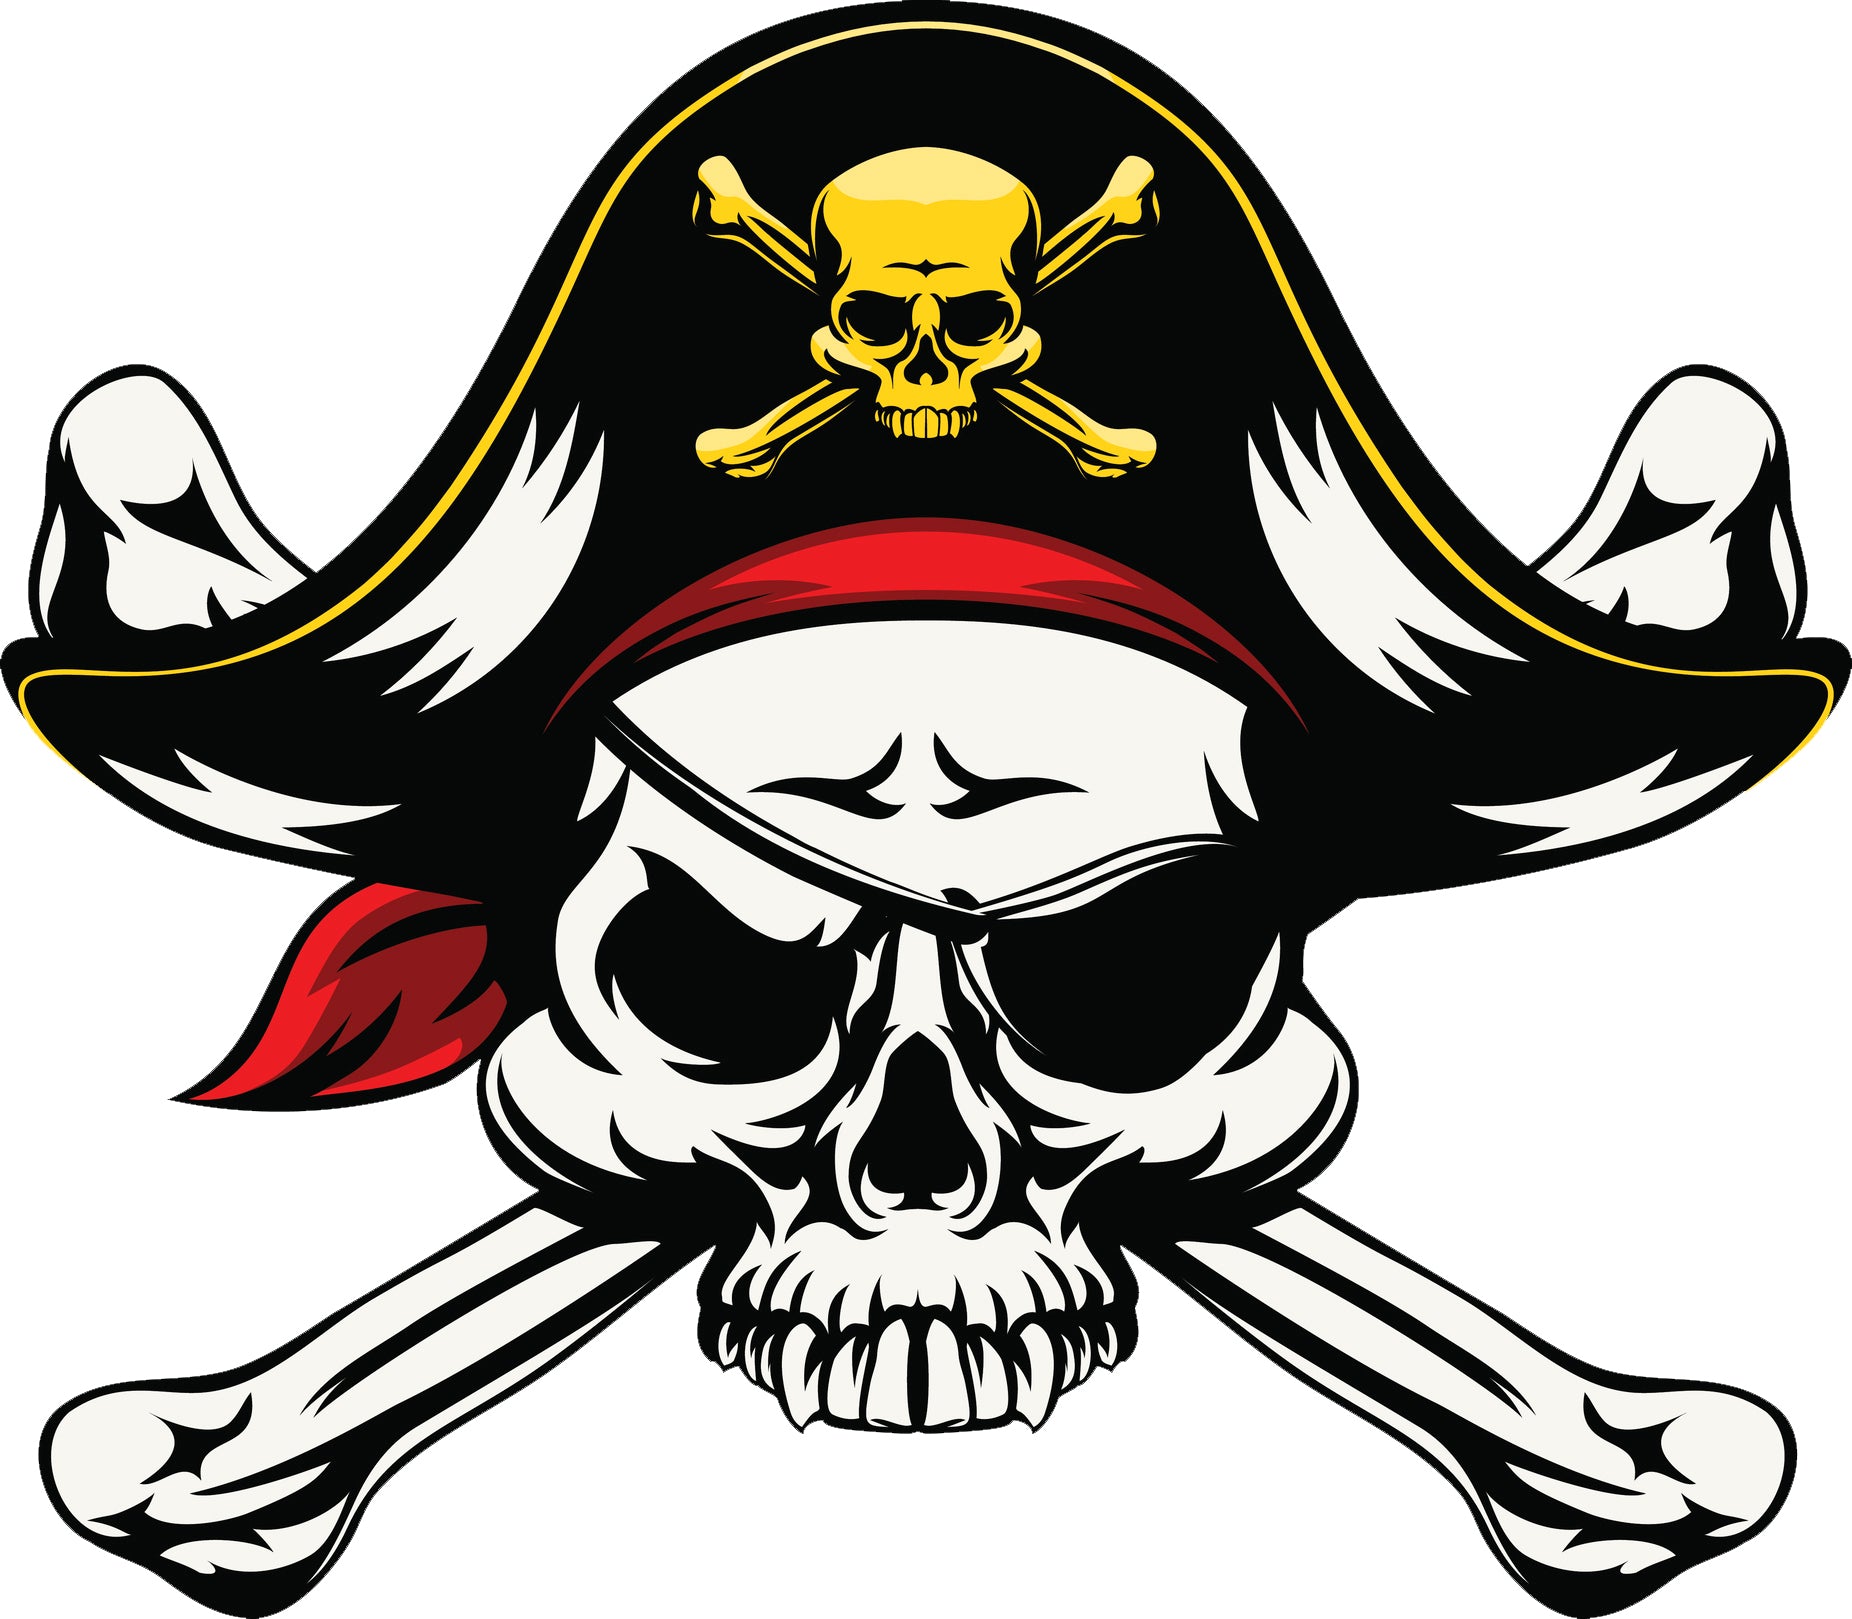 Pirate Captain Skull and Crossbones with Eyepatch Vinyl Decal Sticker